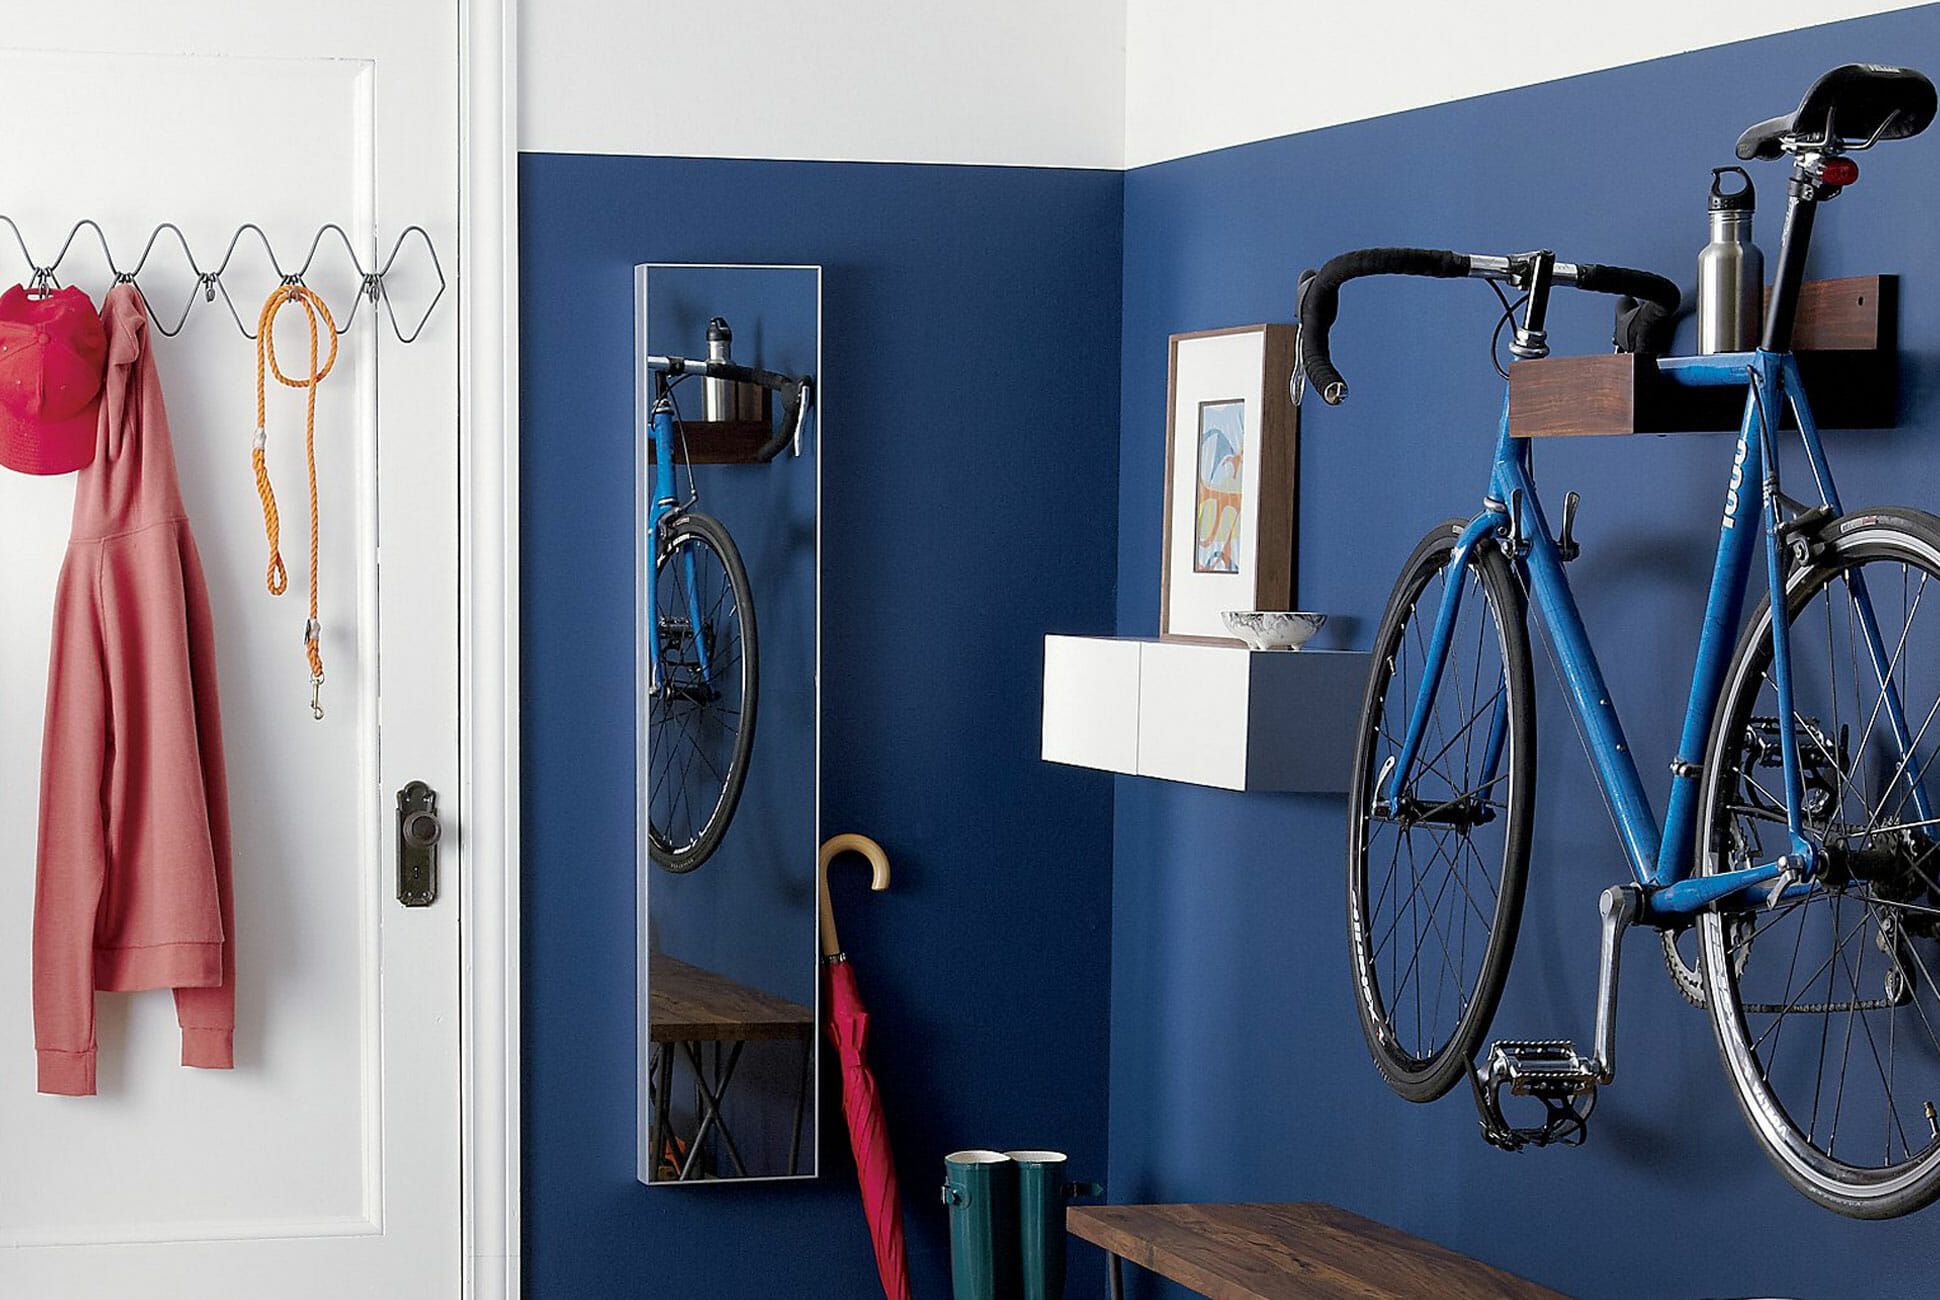 best bike stand for indoor riding